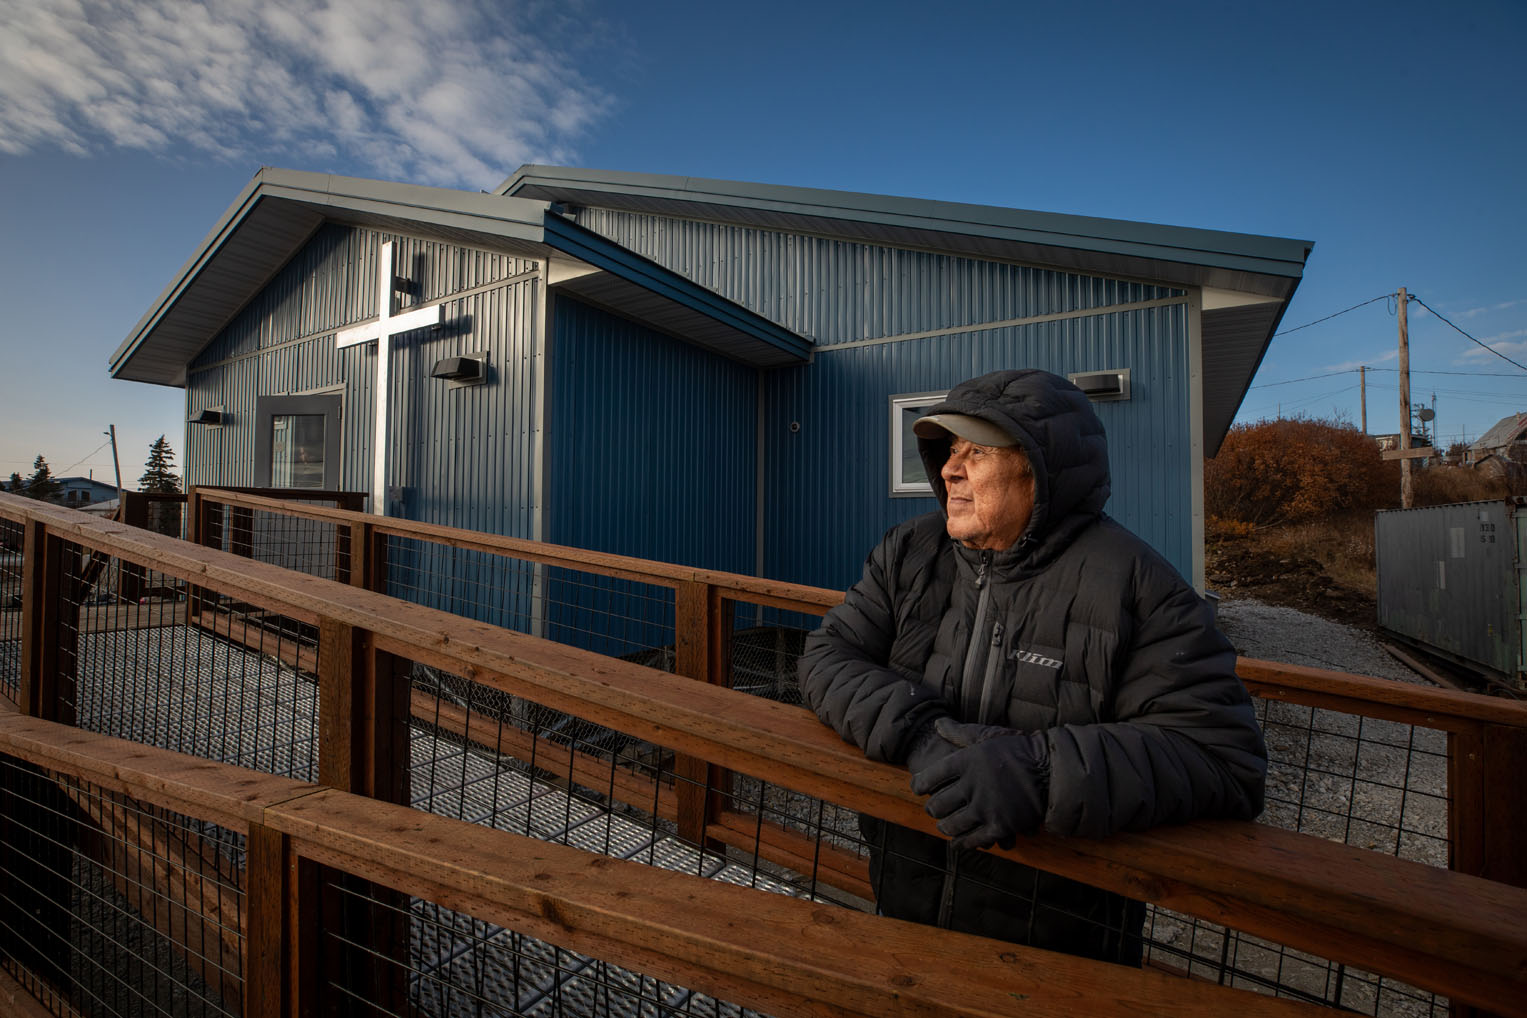 Longtime village resident and member of Koyuk Covenant Church, Melvin “Duma” Otton anticipates the onset of winter and the joy of gathering in their warm new church.